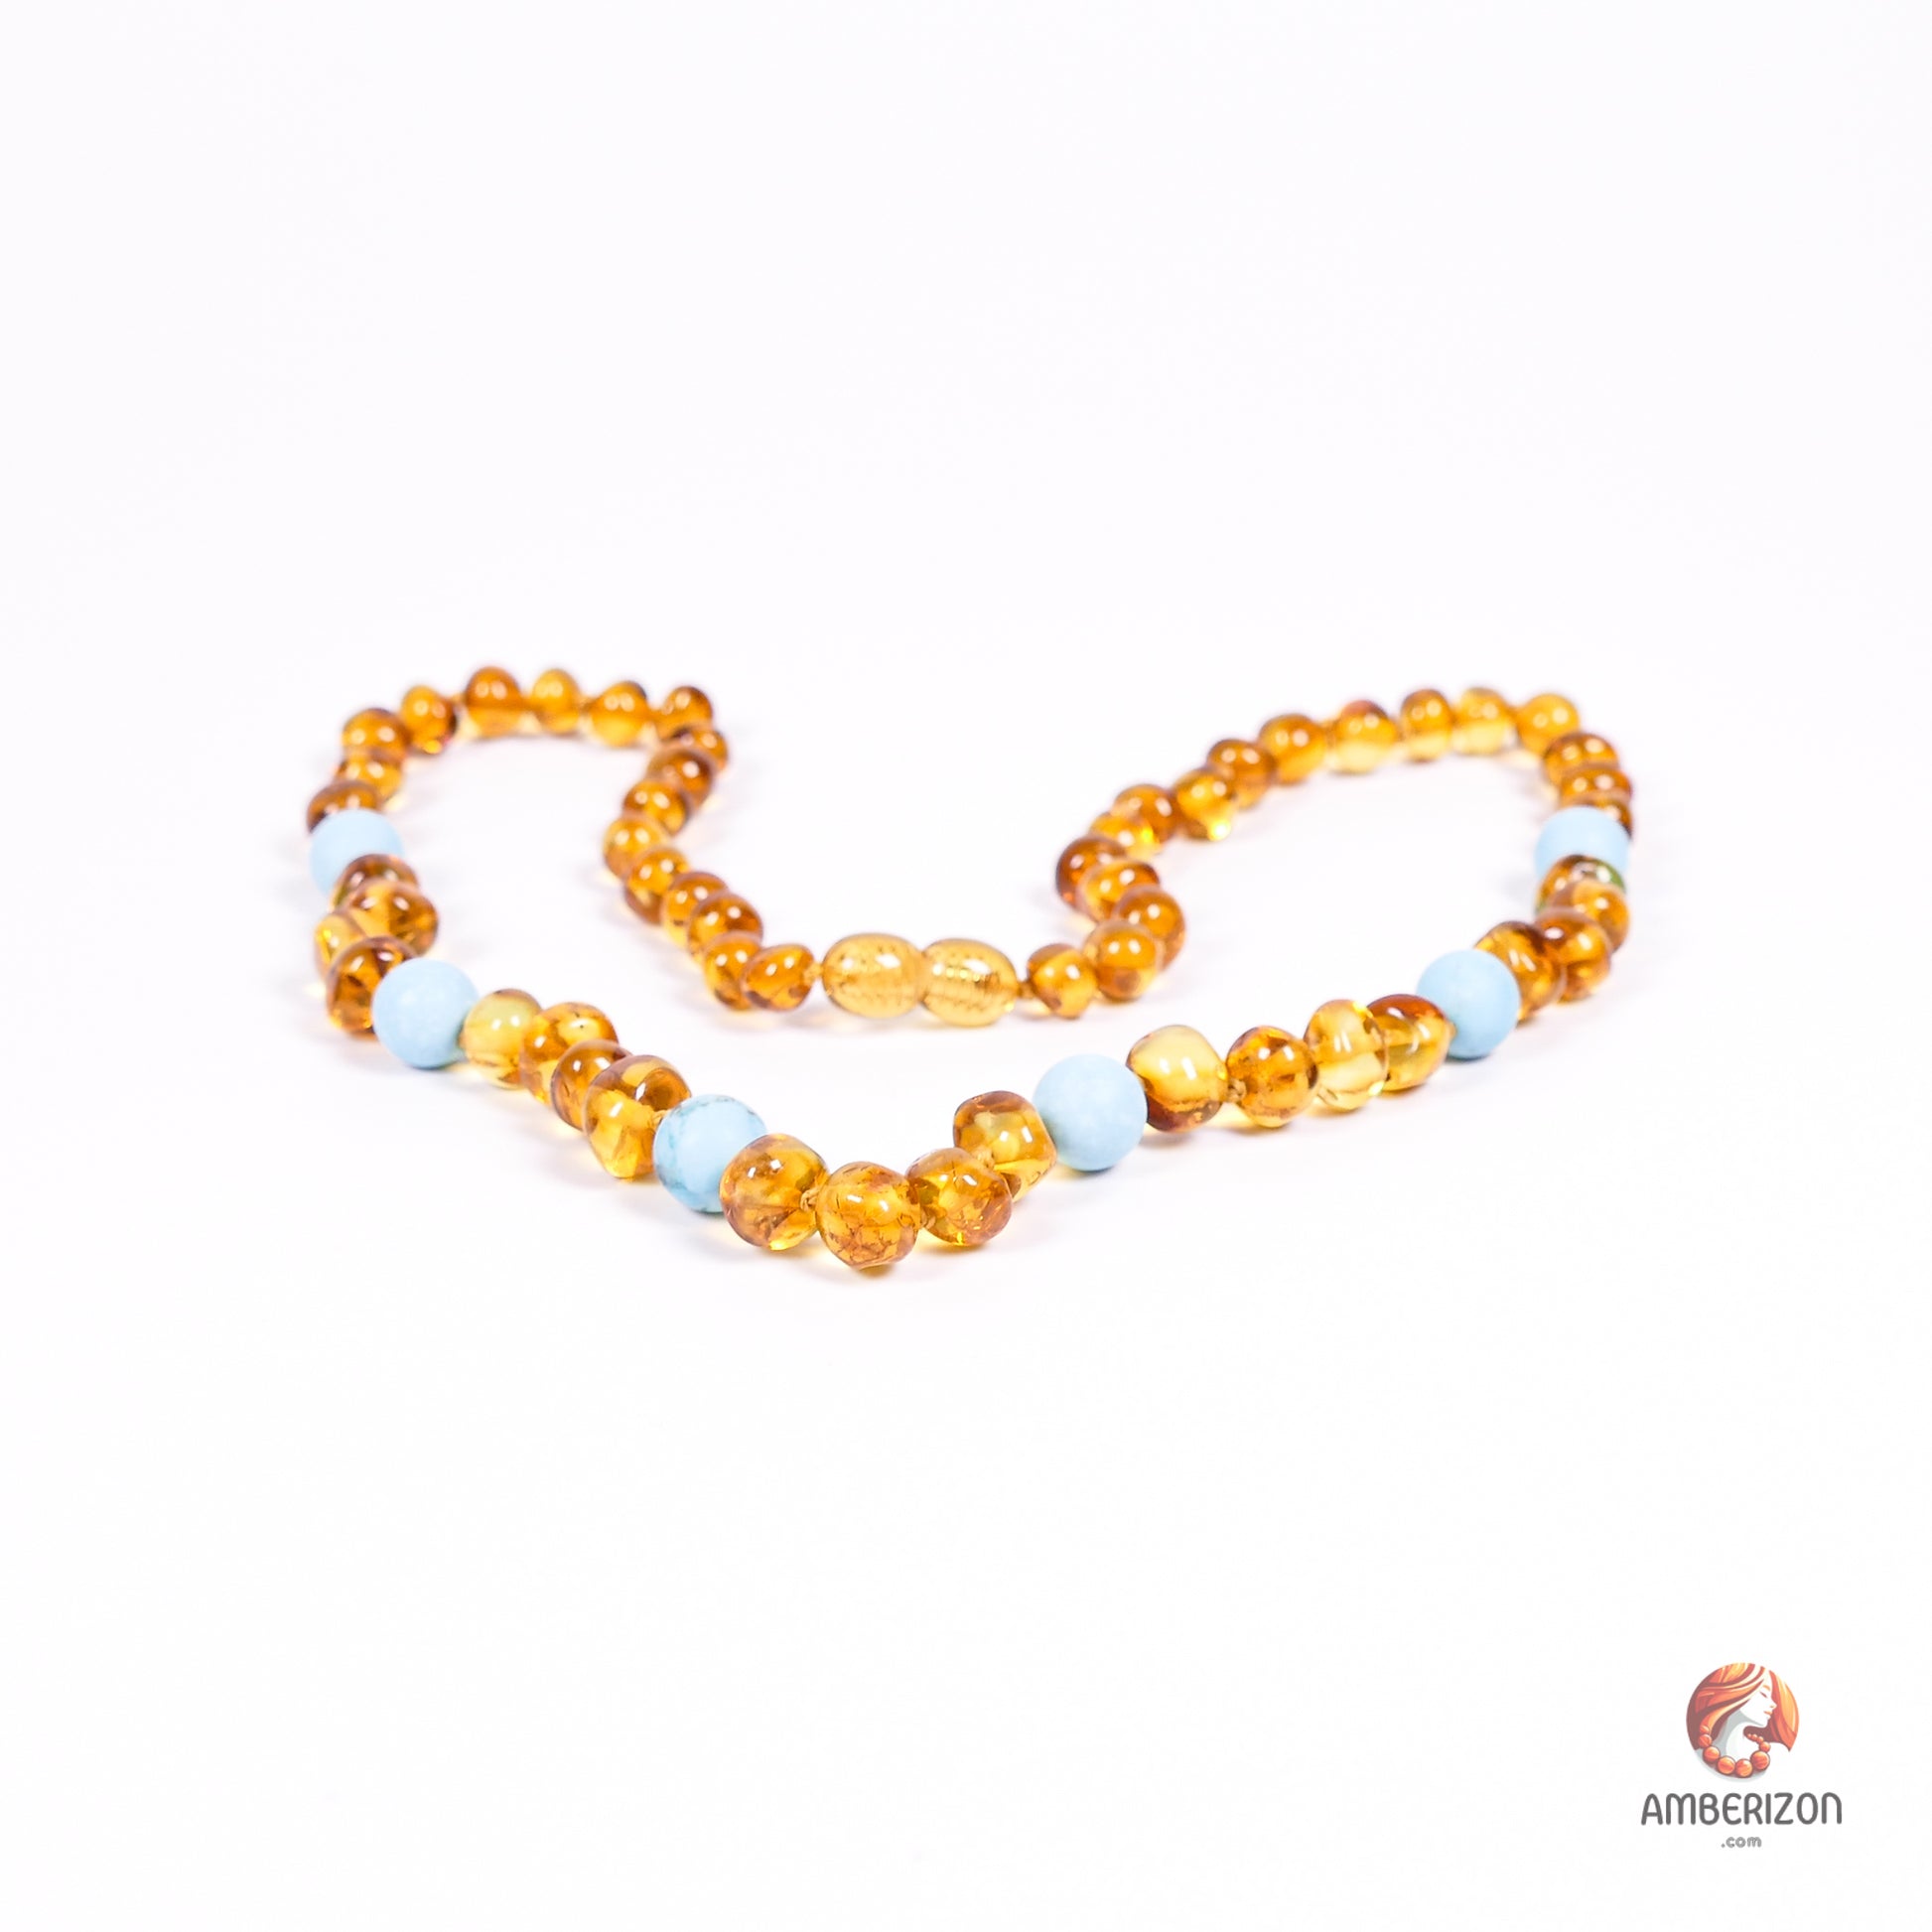 Unisex Baltic Amber Jewelry - Handcrafted in Lithuania (Teenagers)